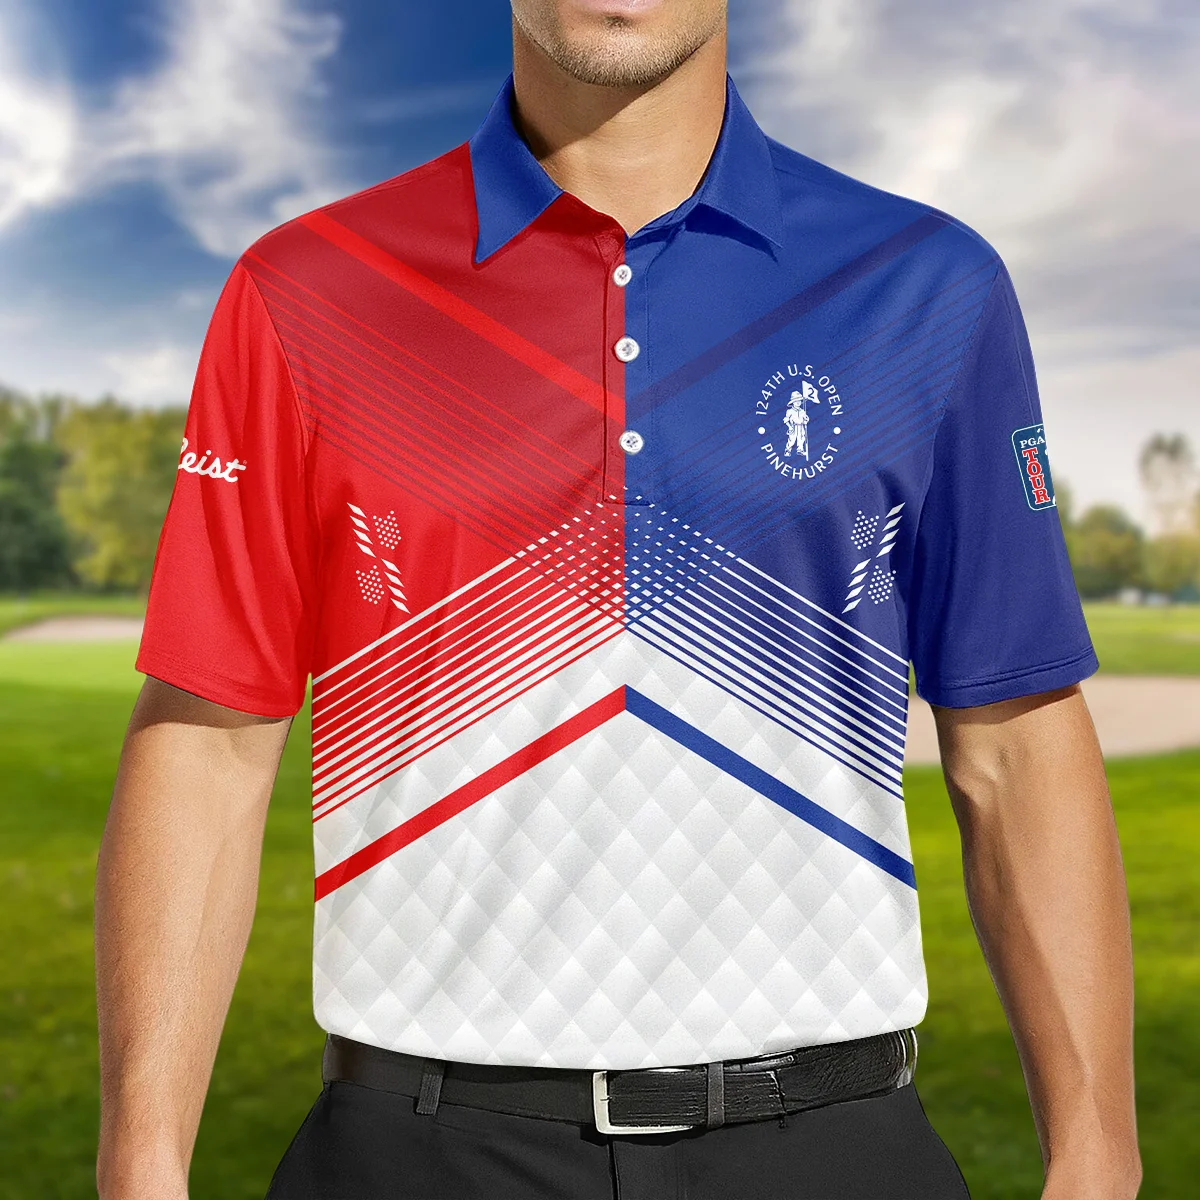 Titleist 124th U.S. Open Pinehurst Blue Red Line White Abstract Zipper Polo Shirt Style Classic